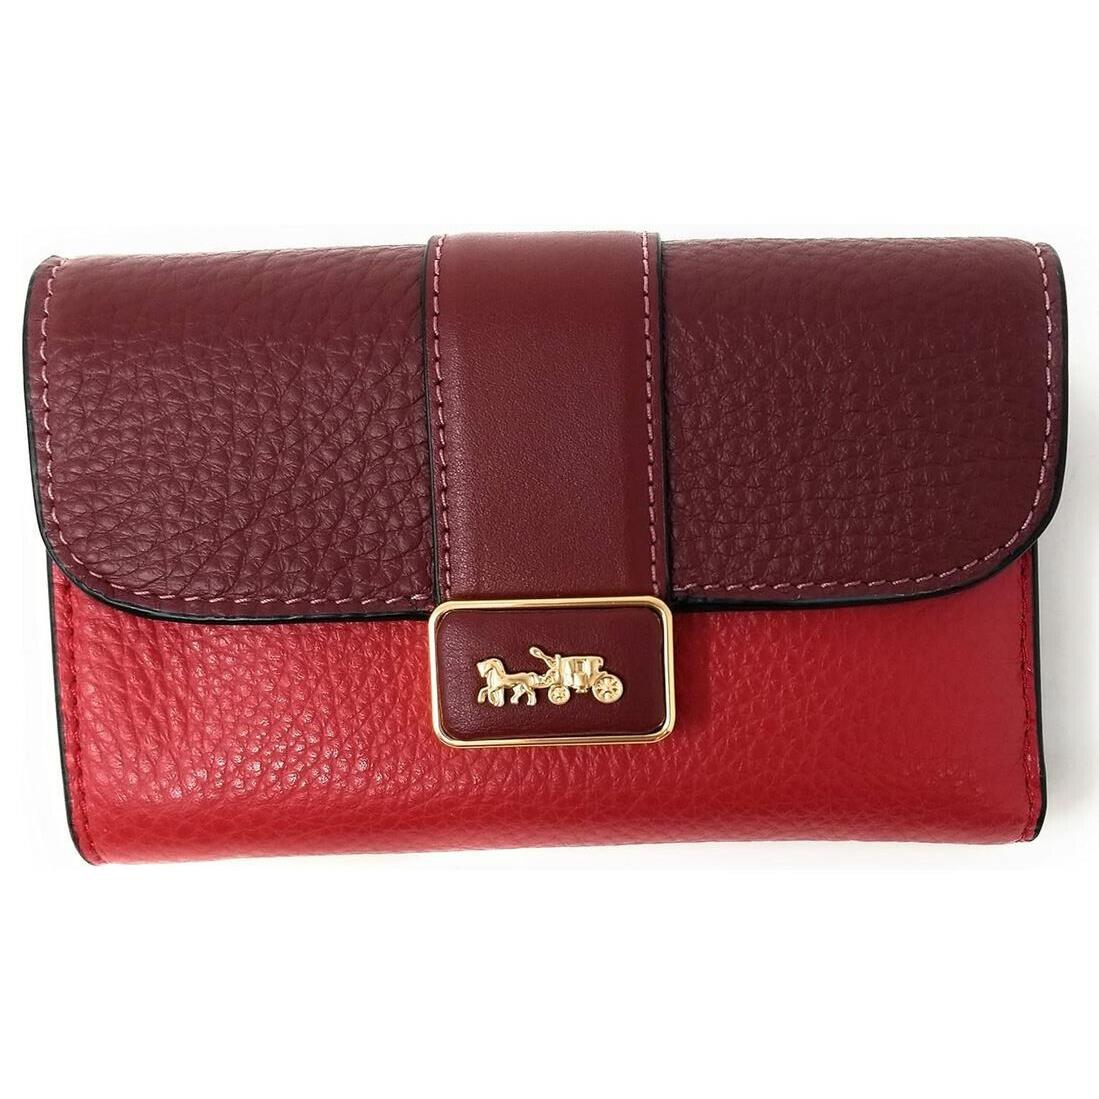 Coach Grace Colorblock Pebble Leather Medium Wallet Red Apple C061 - Hardware: Gold, Exterior: Red Apple, Lining: Dark Red